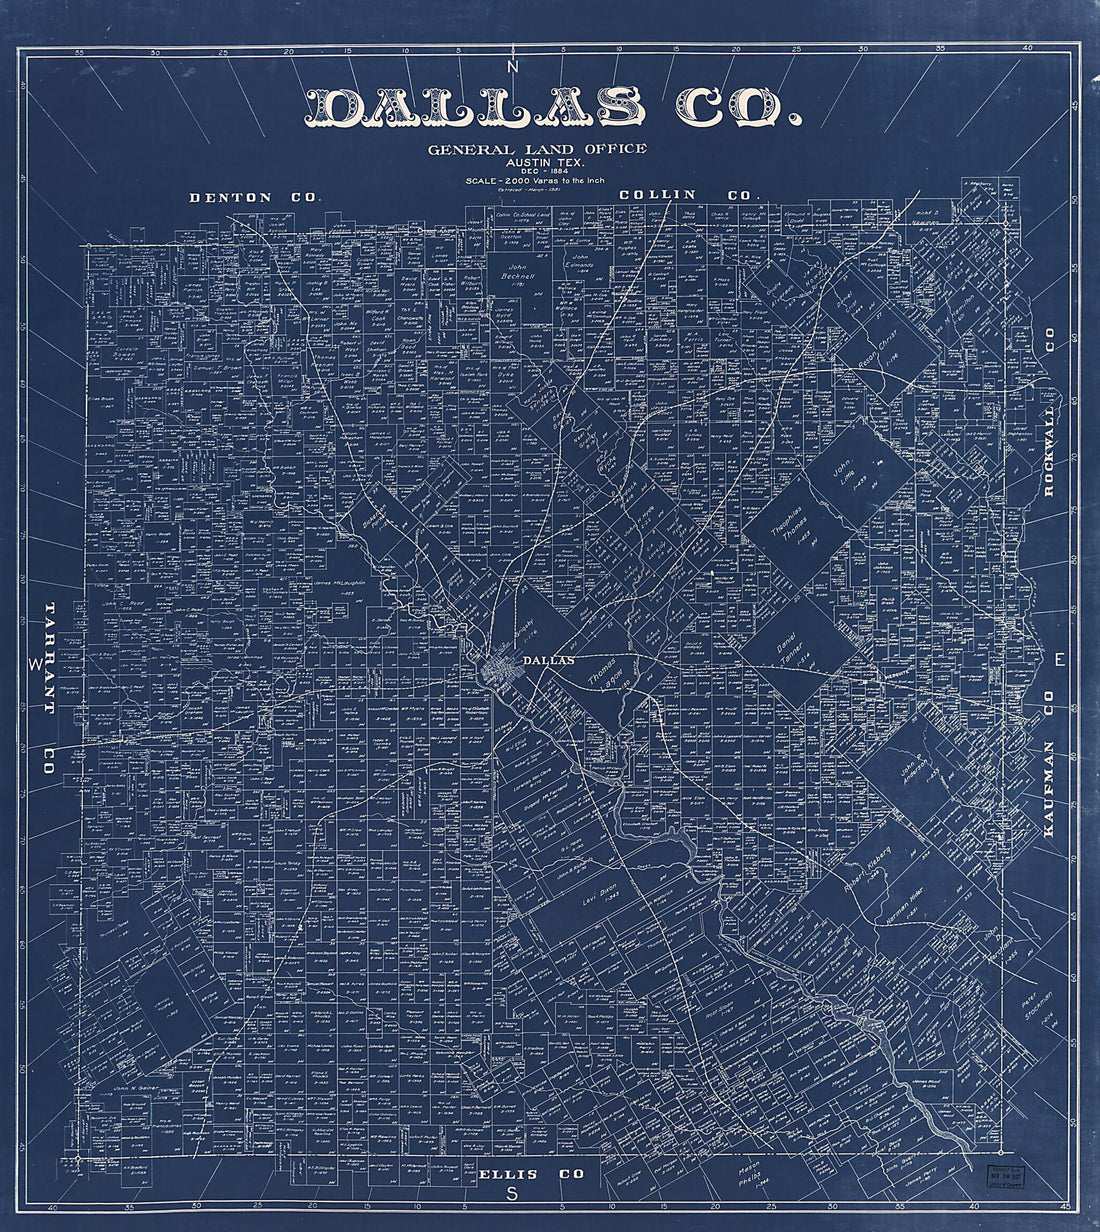 This old map of Dallas County, Texas. (Dallas County, Texas) from 1884 was created by  Texas. General Land Office in 1884